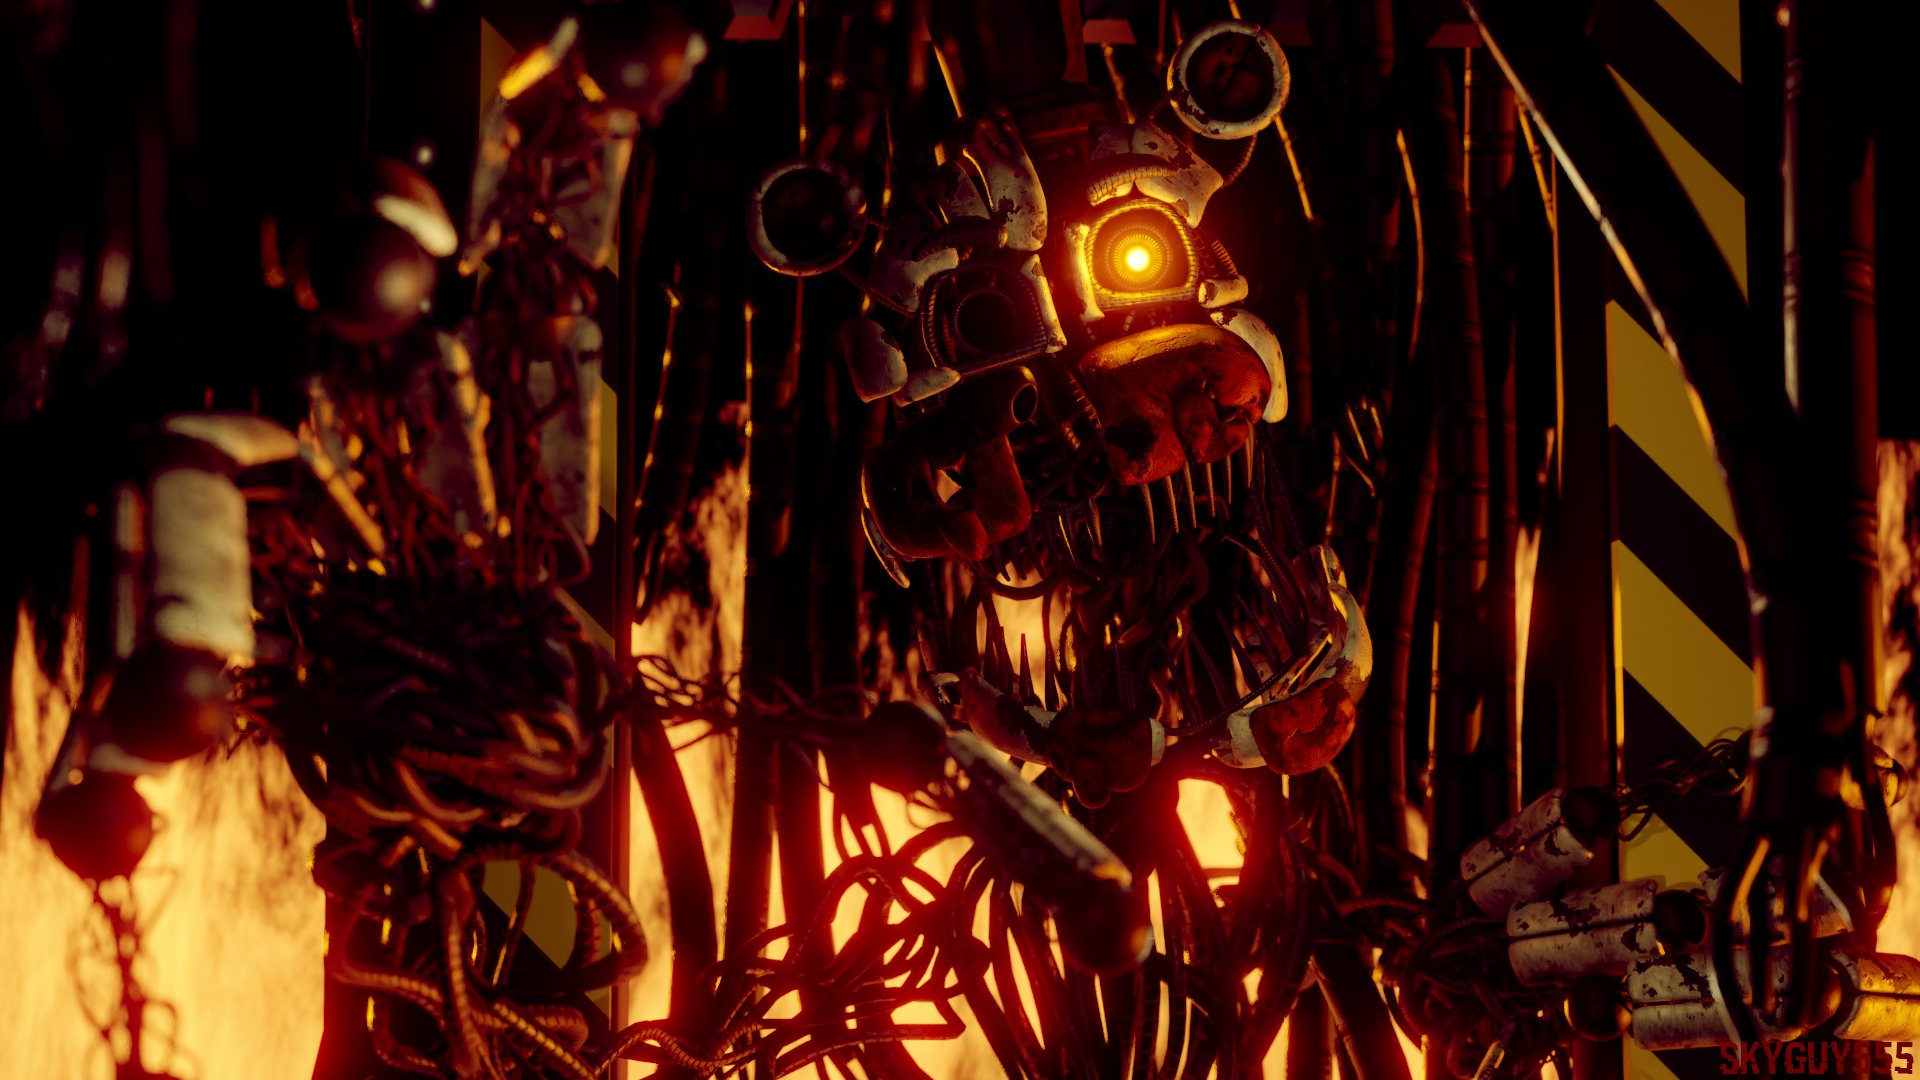 Sky on X: This ends for all of us Molten Freddy model by